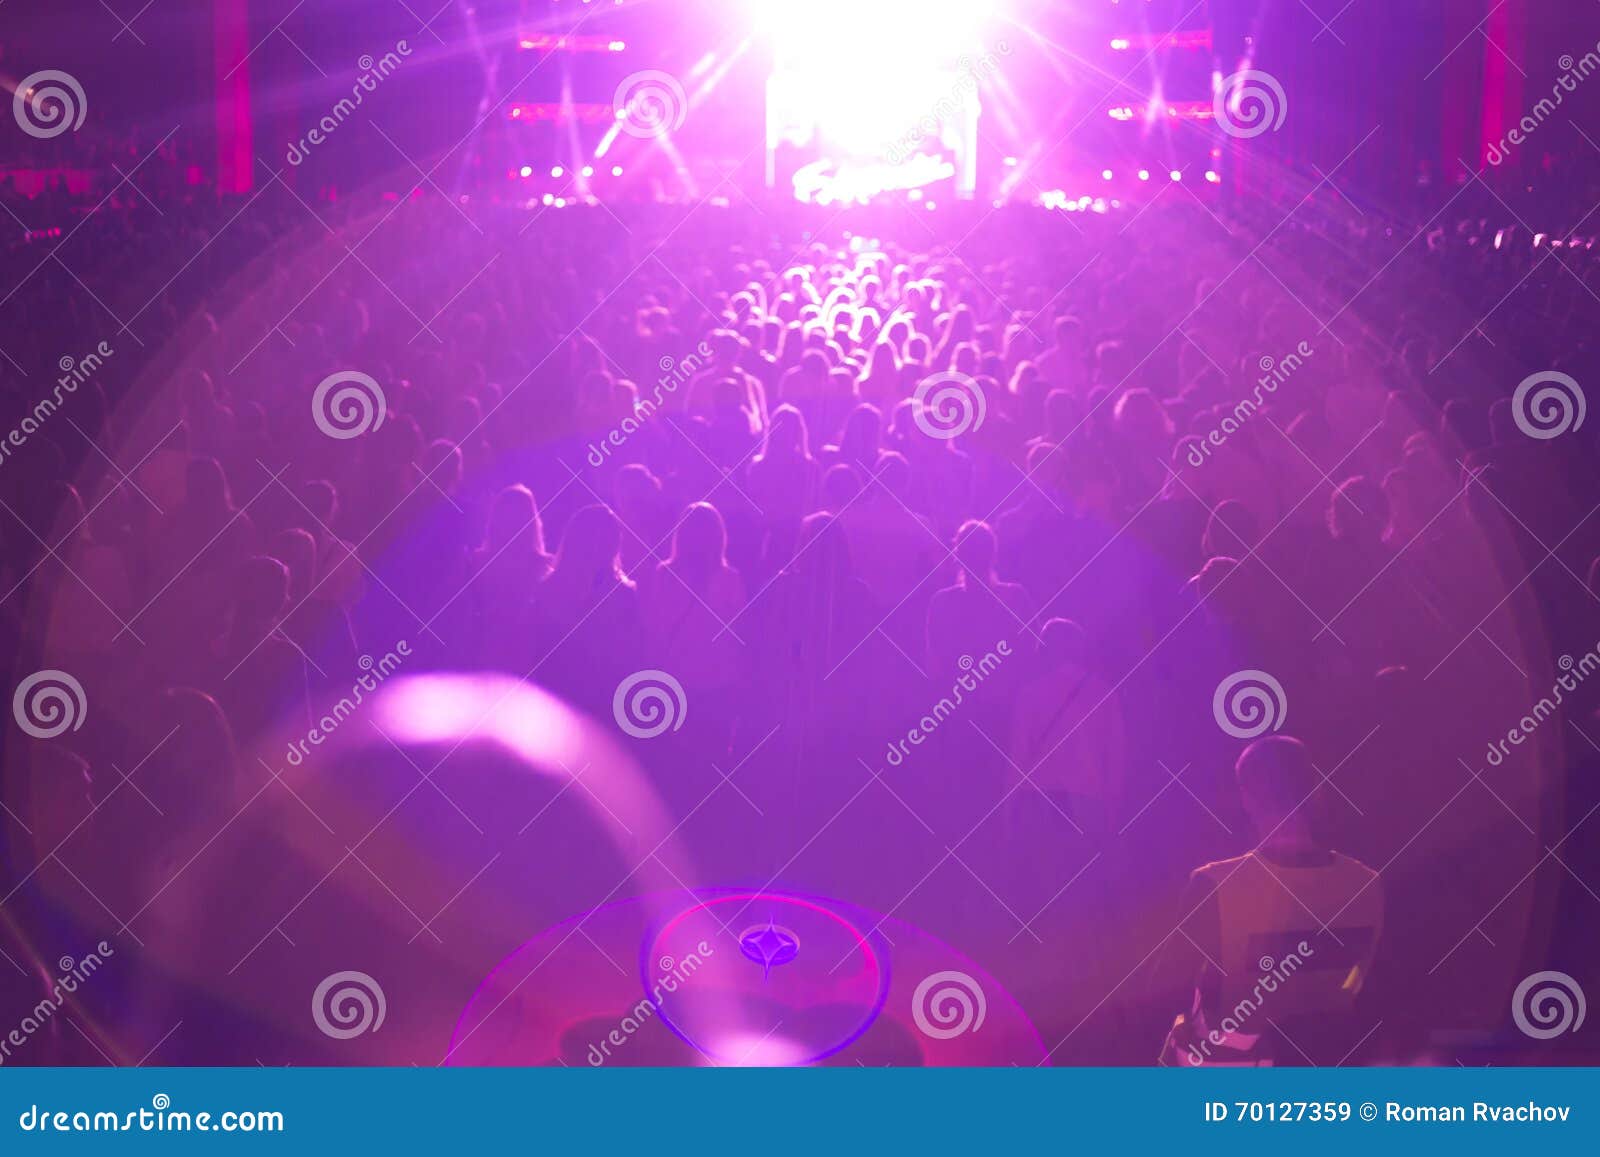 Spectators in the Large Concert Hall. Stock Image - Image of emotional ...